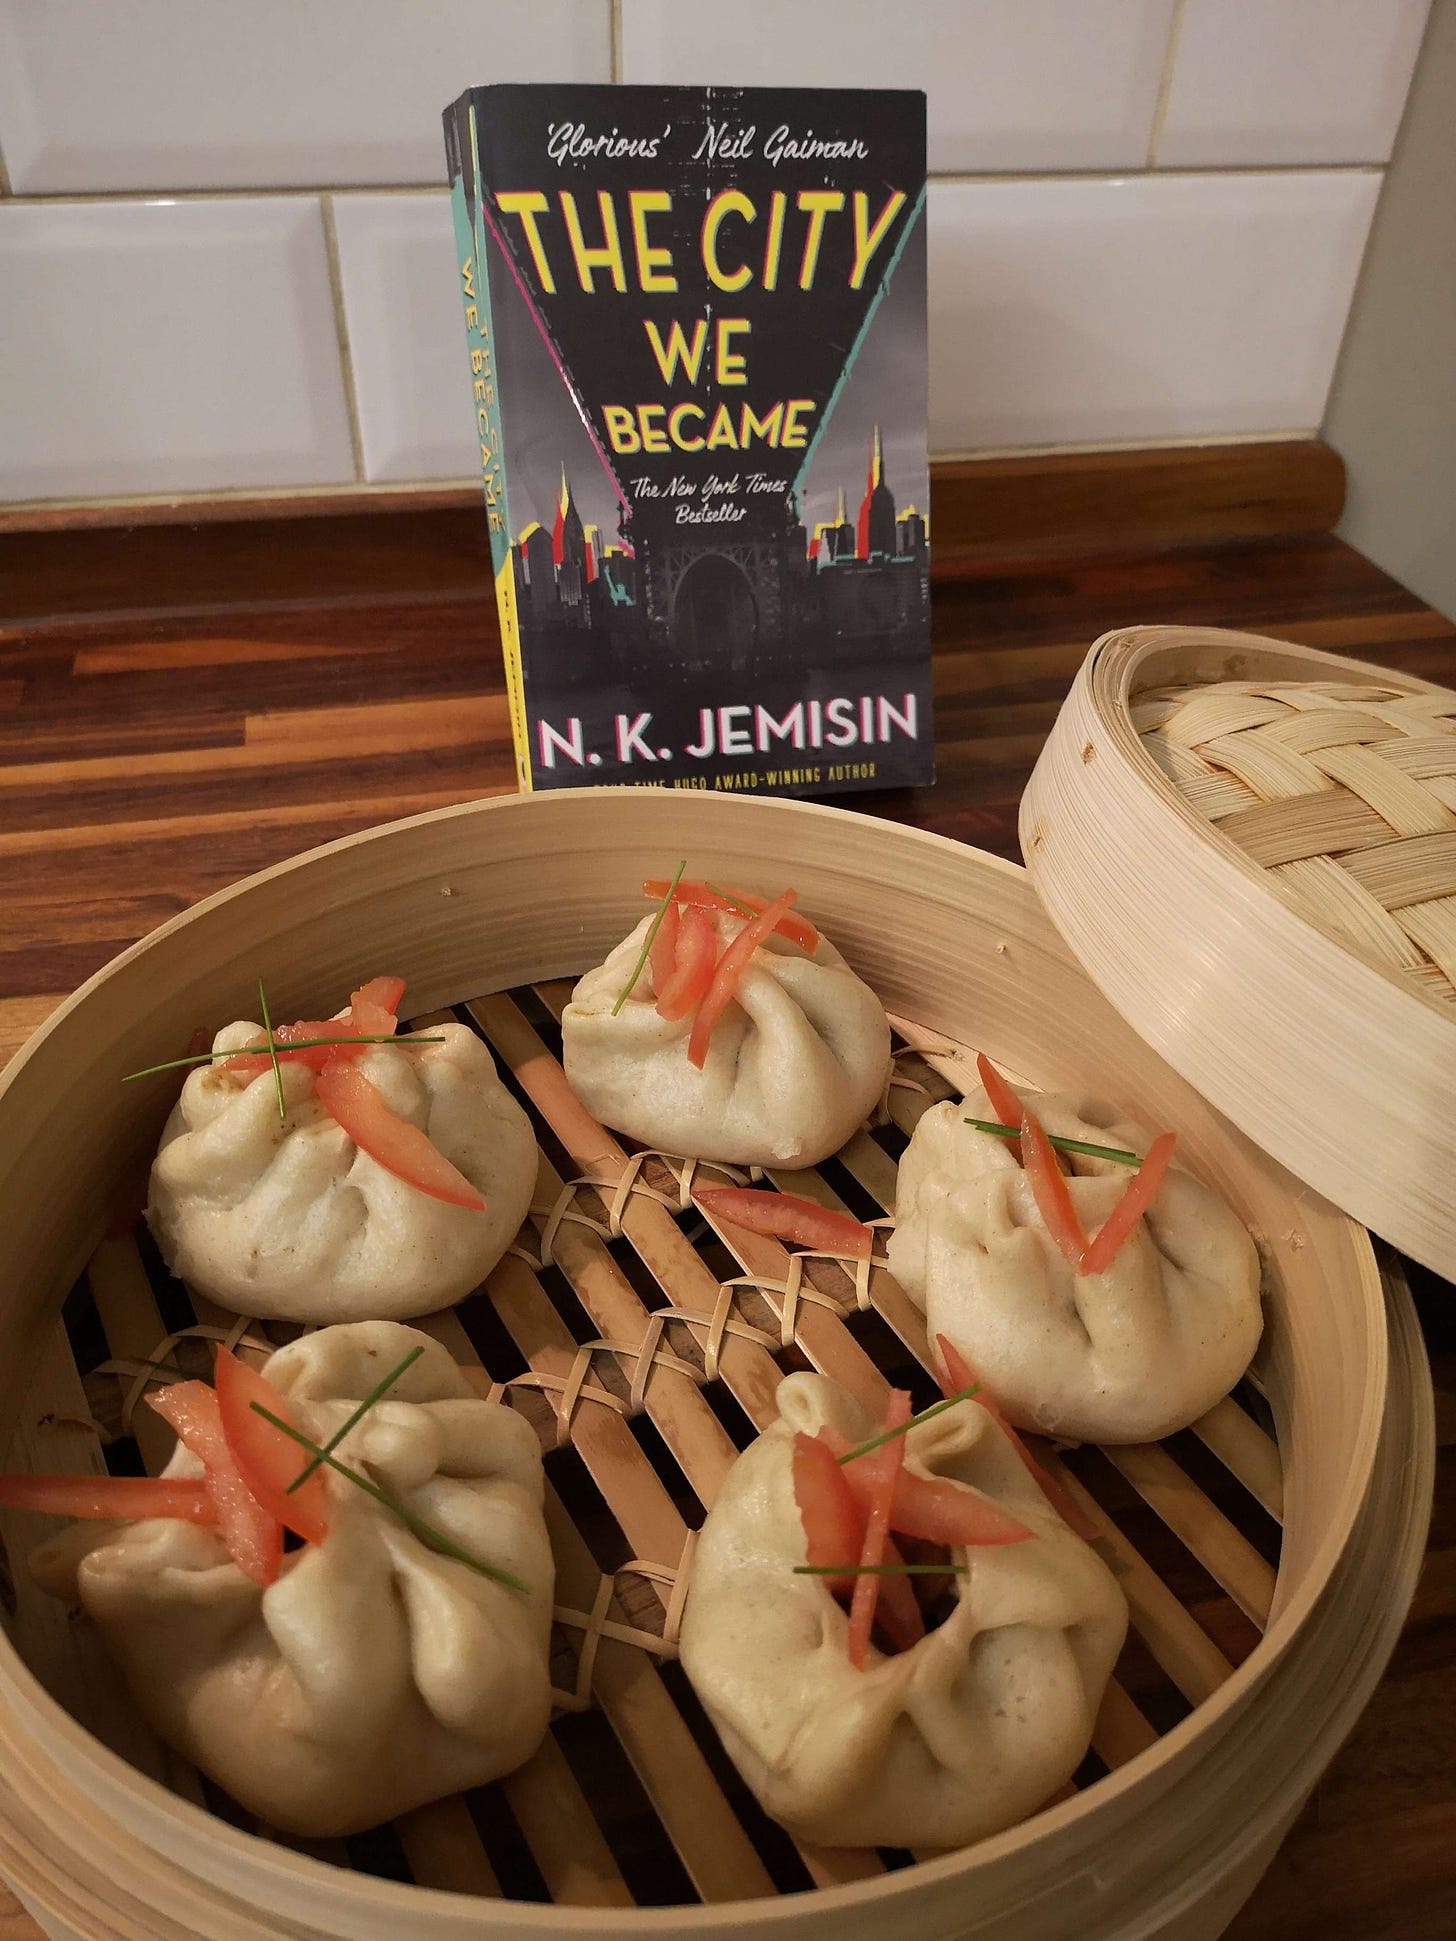 Delicious looking dumplings sitting in a bamboo steamer in front of N.K. Jemisin's "The City We Became."